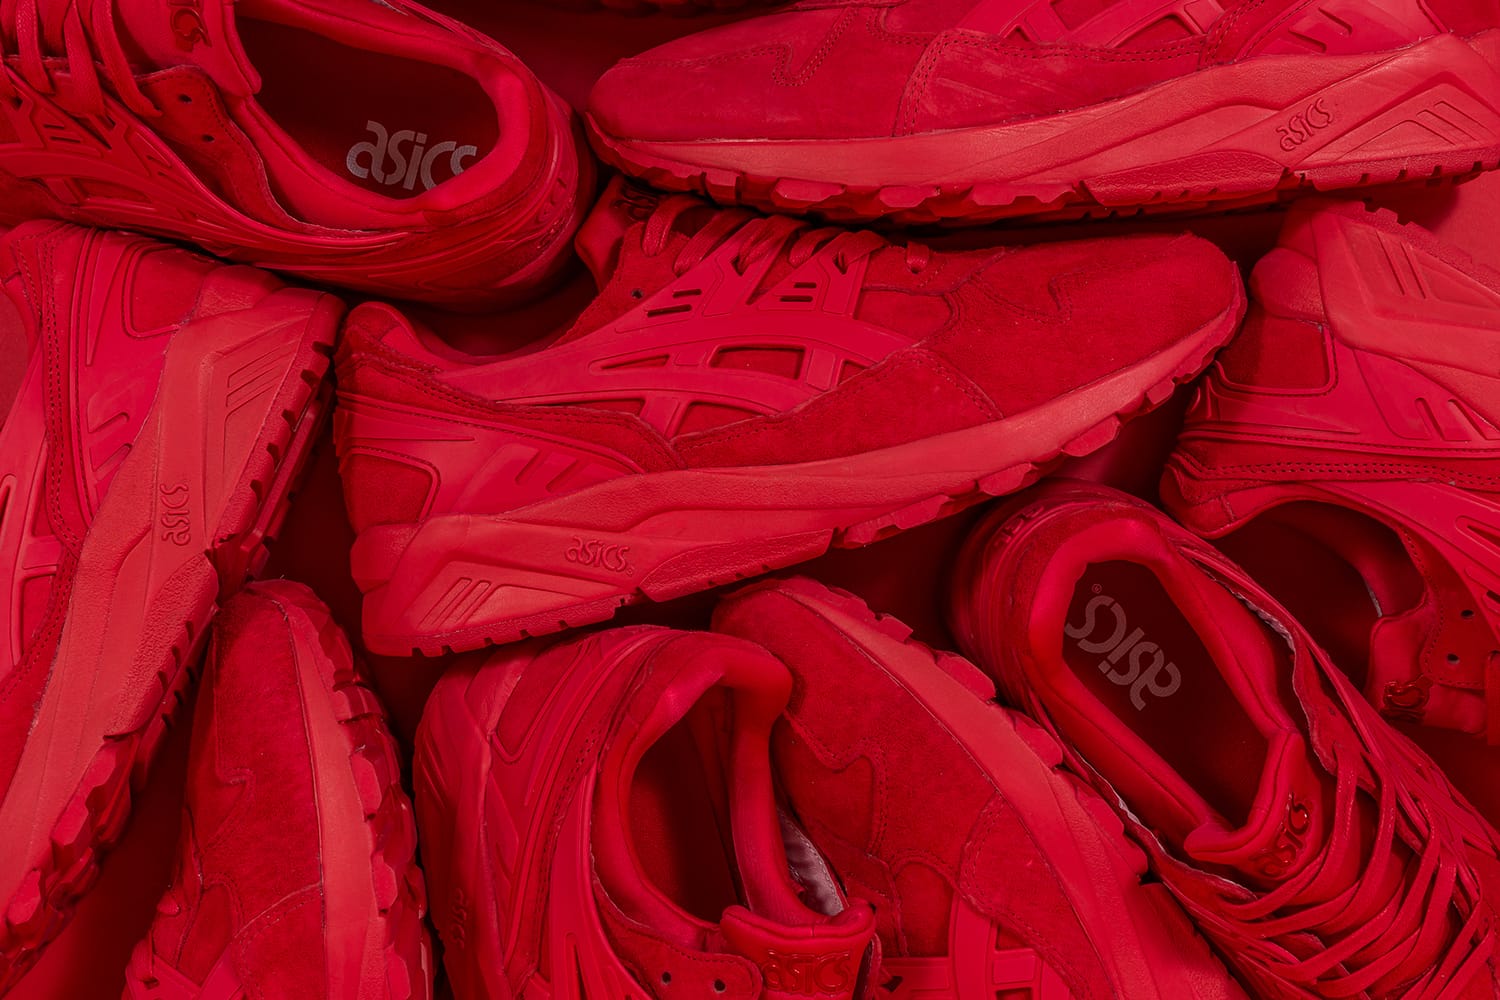 asics all red shoes